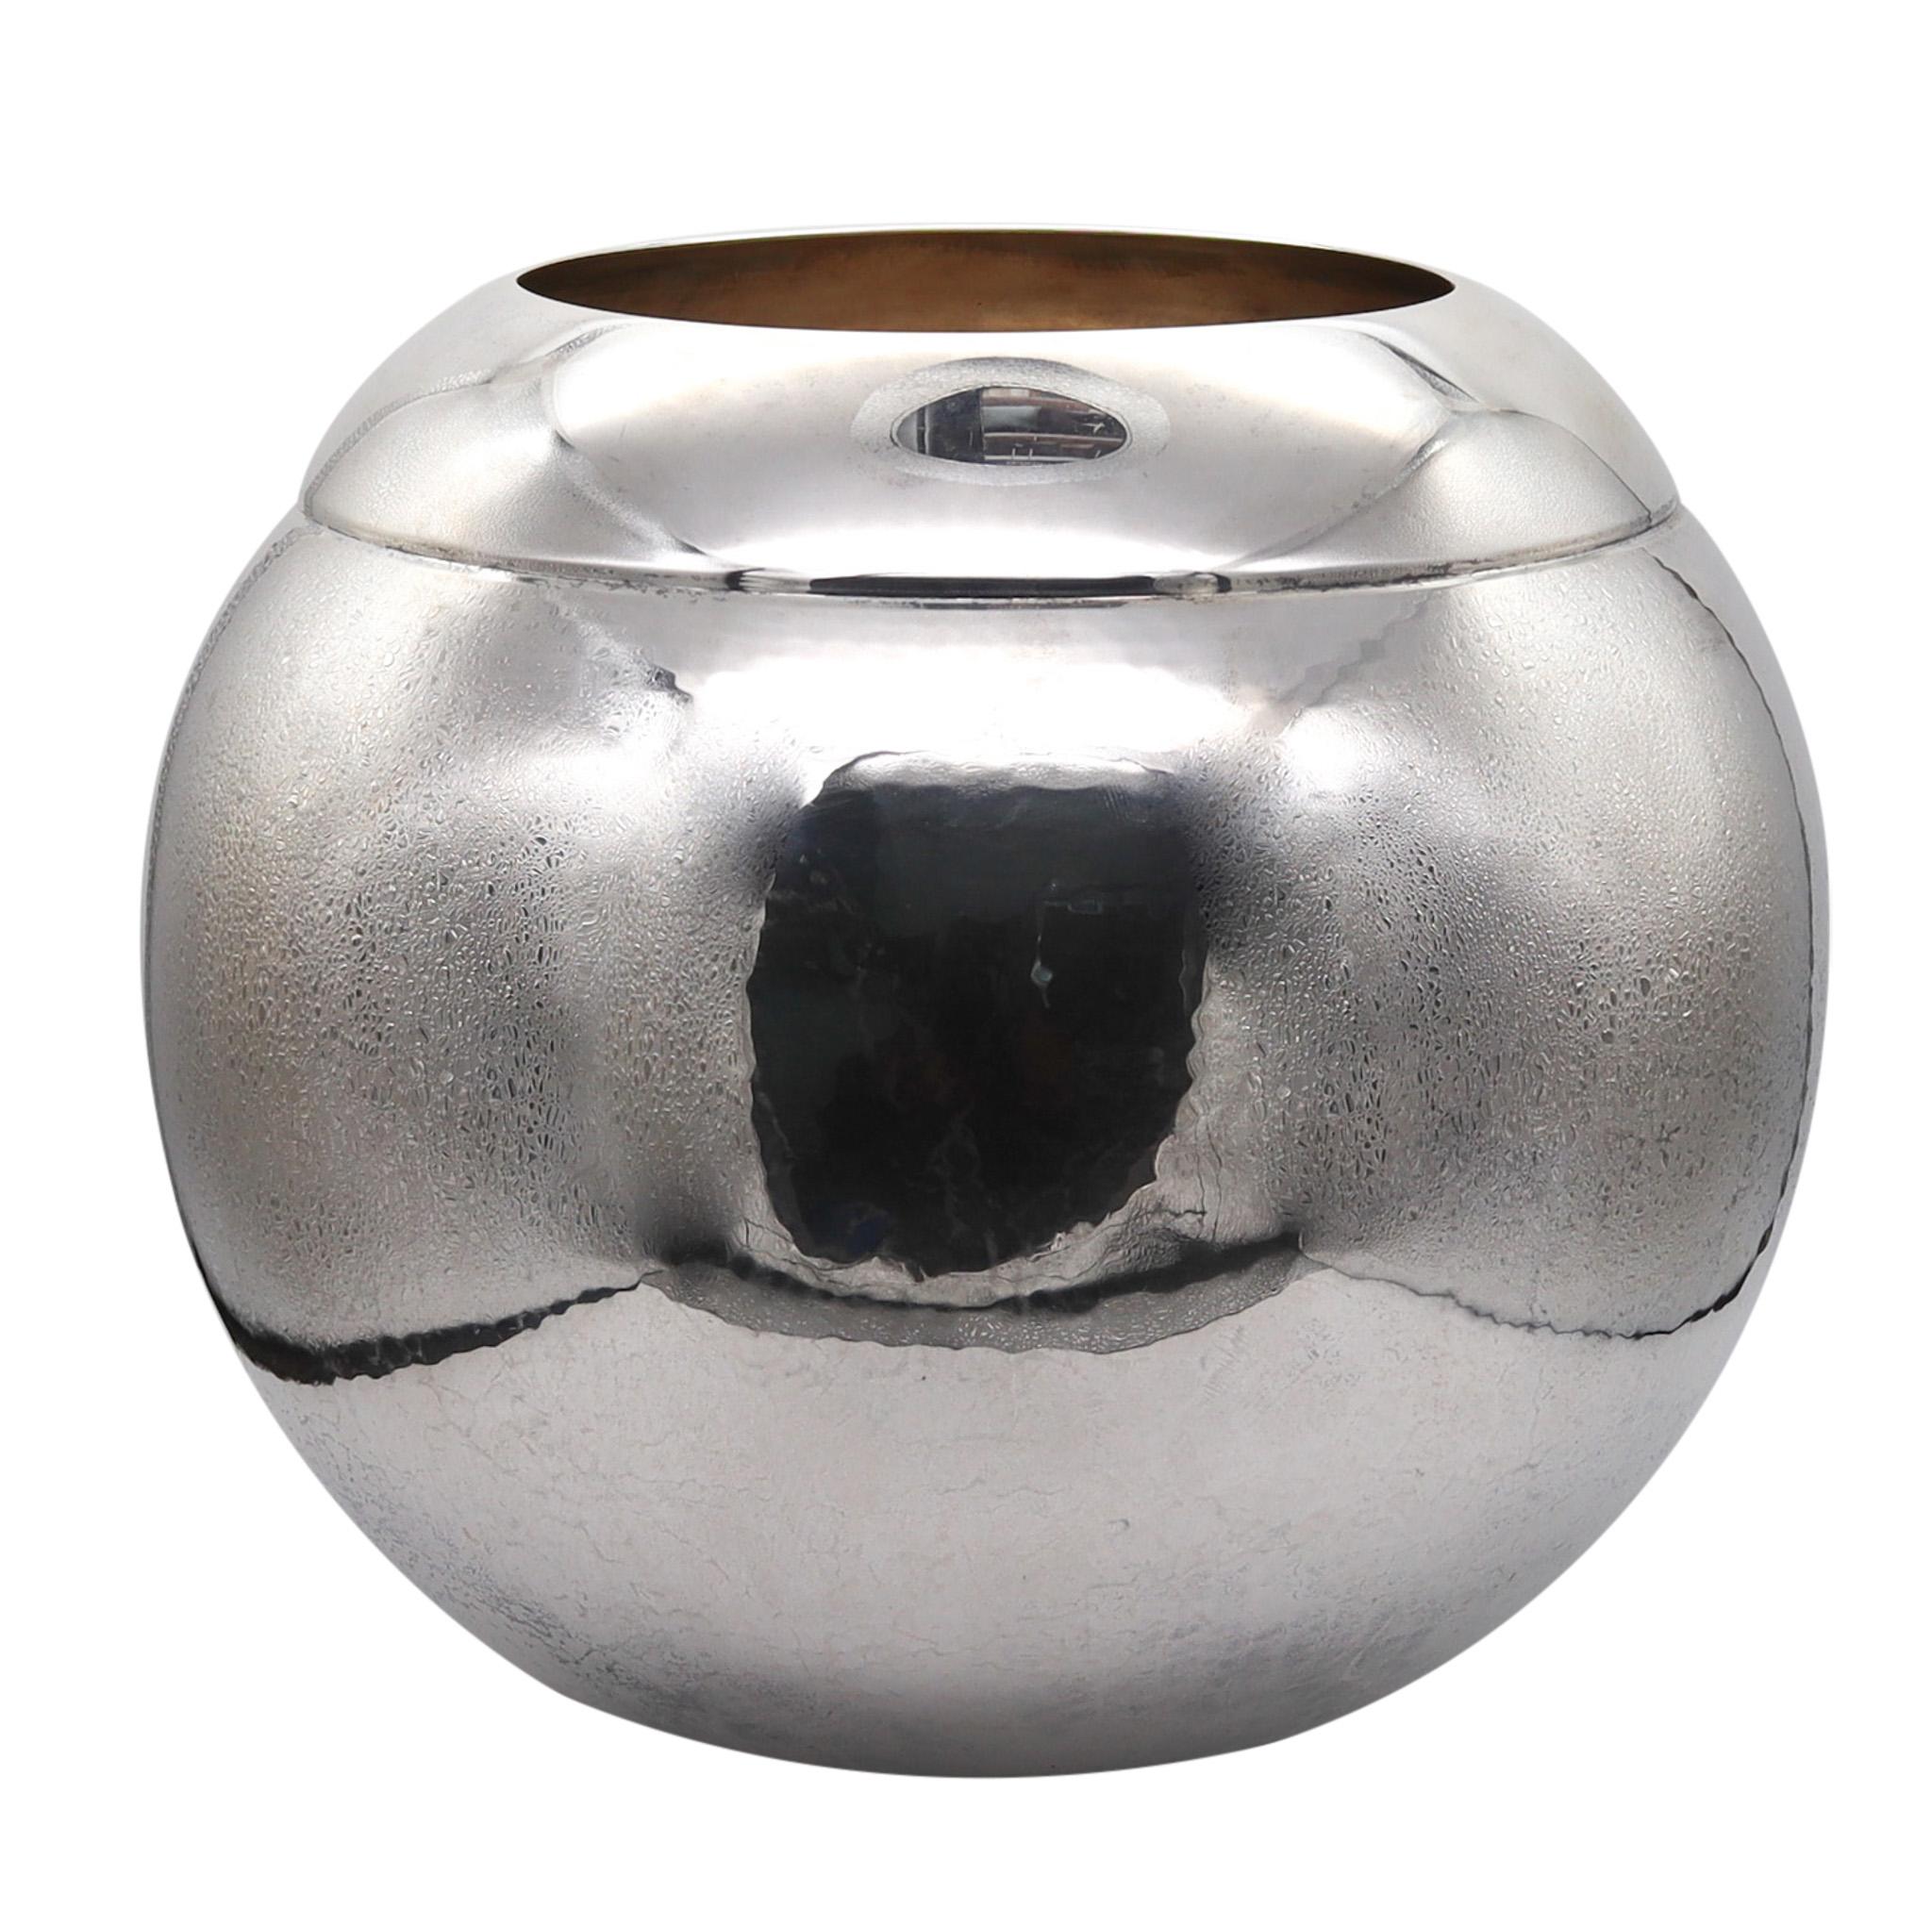 Silver vase designed by Asprey of London.

A gorgeous oversize spherical decorative vase, created in London England by Asprey. It was crafted with modernist patterns in very fine solid .925/.999 sterling silver and decorated with hammered and high